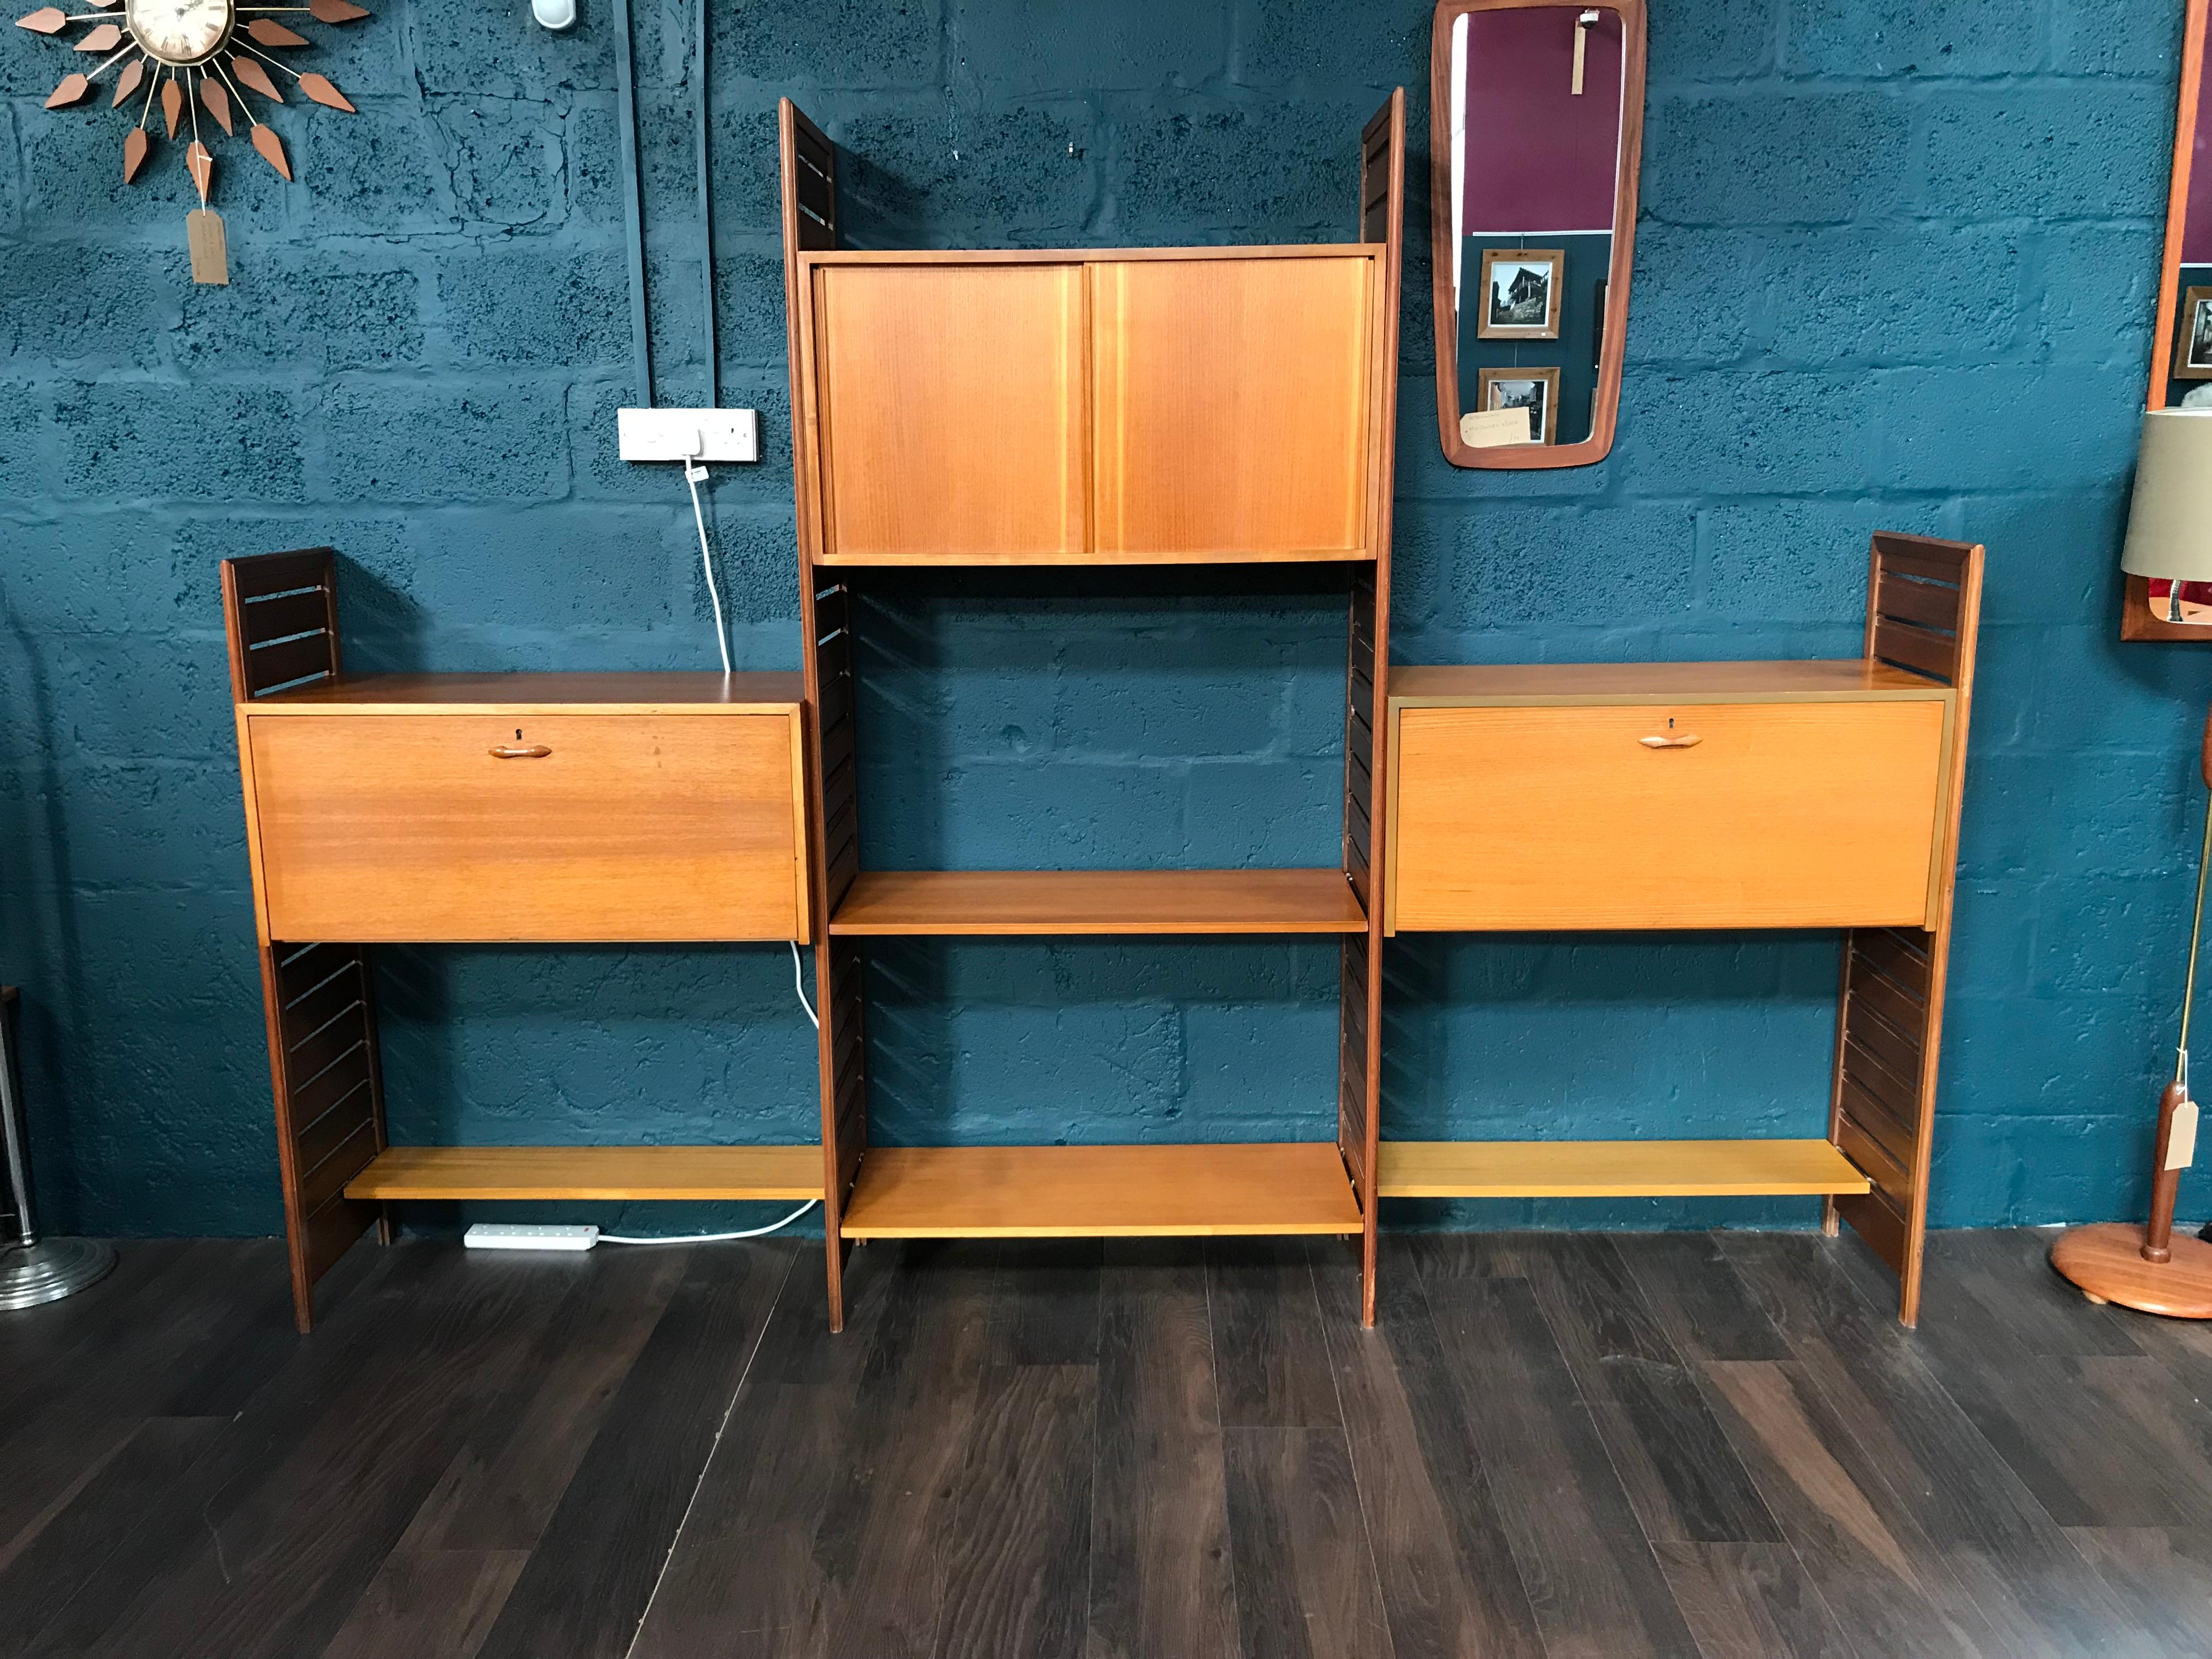 3-Bay Ladderax Teak Midcentury Shelving System by Robert Heal for Staples For Sale 1